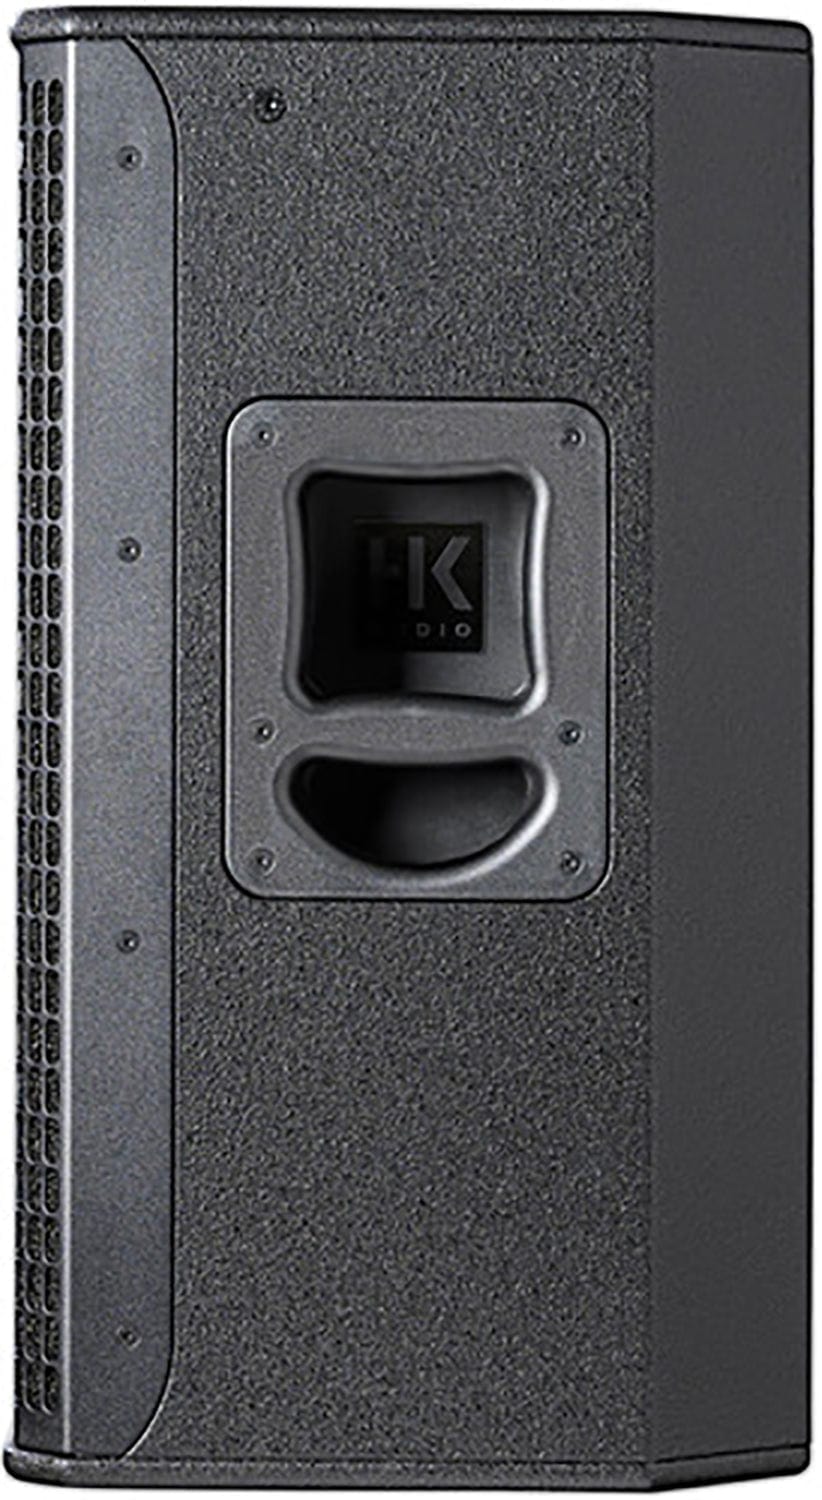 HK Audio Linear 7 112 FA Active Full-Range 2000W 12" Speaker - PSSL ProSound and Stage Lighting